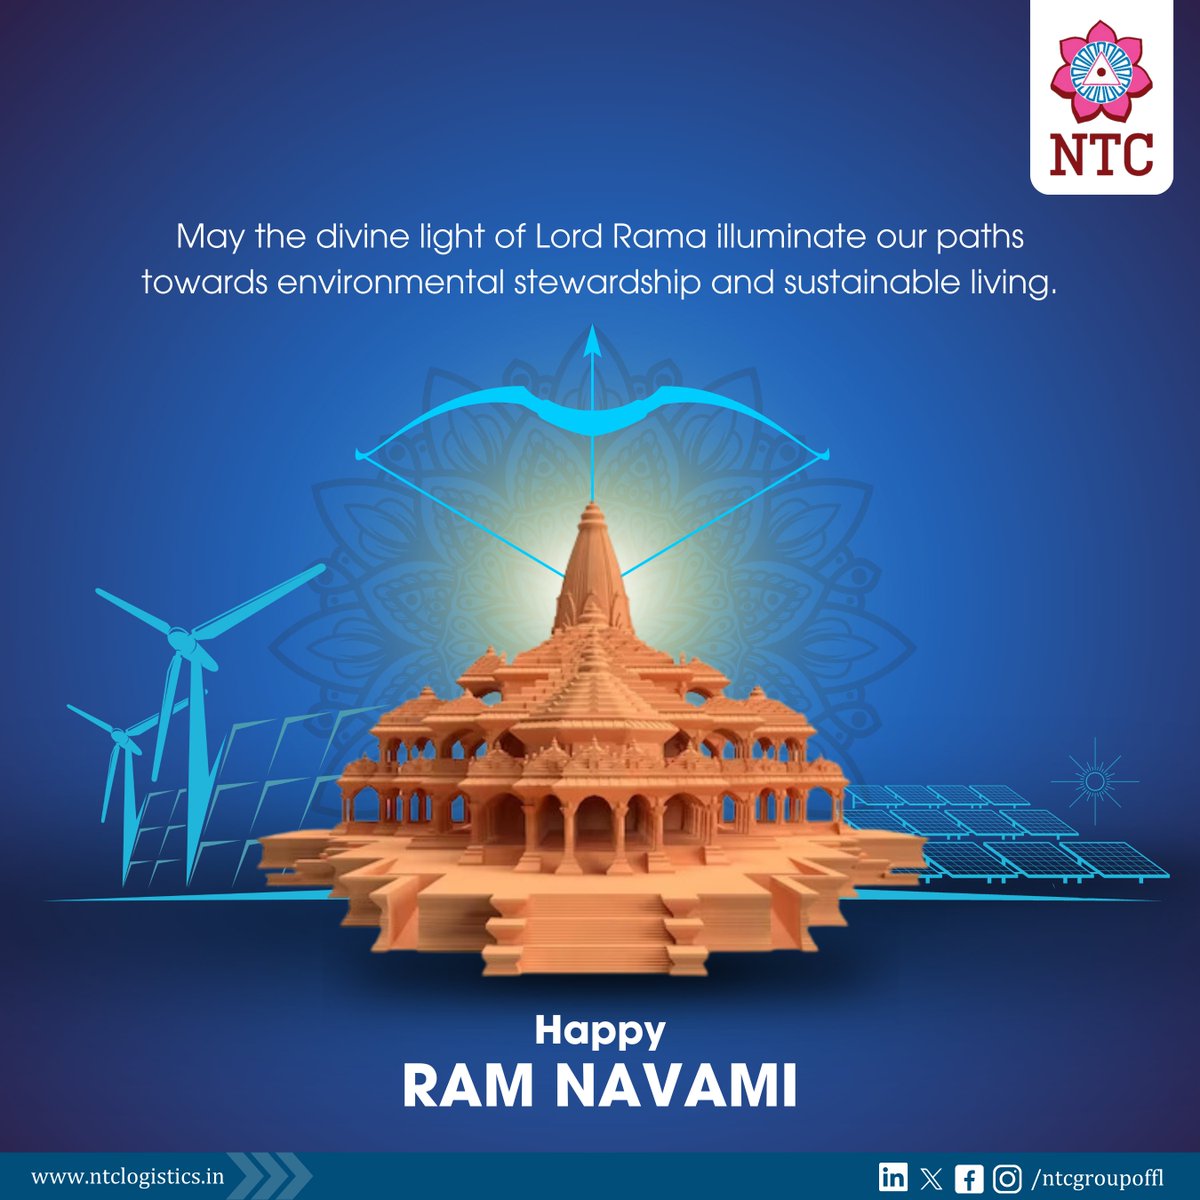 May we all be guided onto the right path, where goodness prevails. Happy Ram Navami to you and your loved ones. Let the glow of diyas and the echoes of chants bring boundless joy and fulfilment into your lives. #HappyRamNavami

#LordRam #indianfestivals #logistics #Sustainability